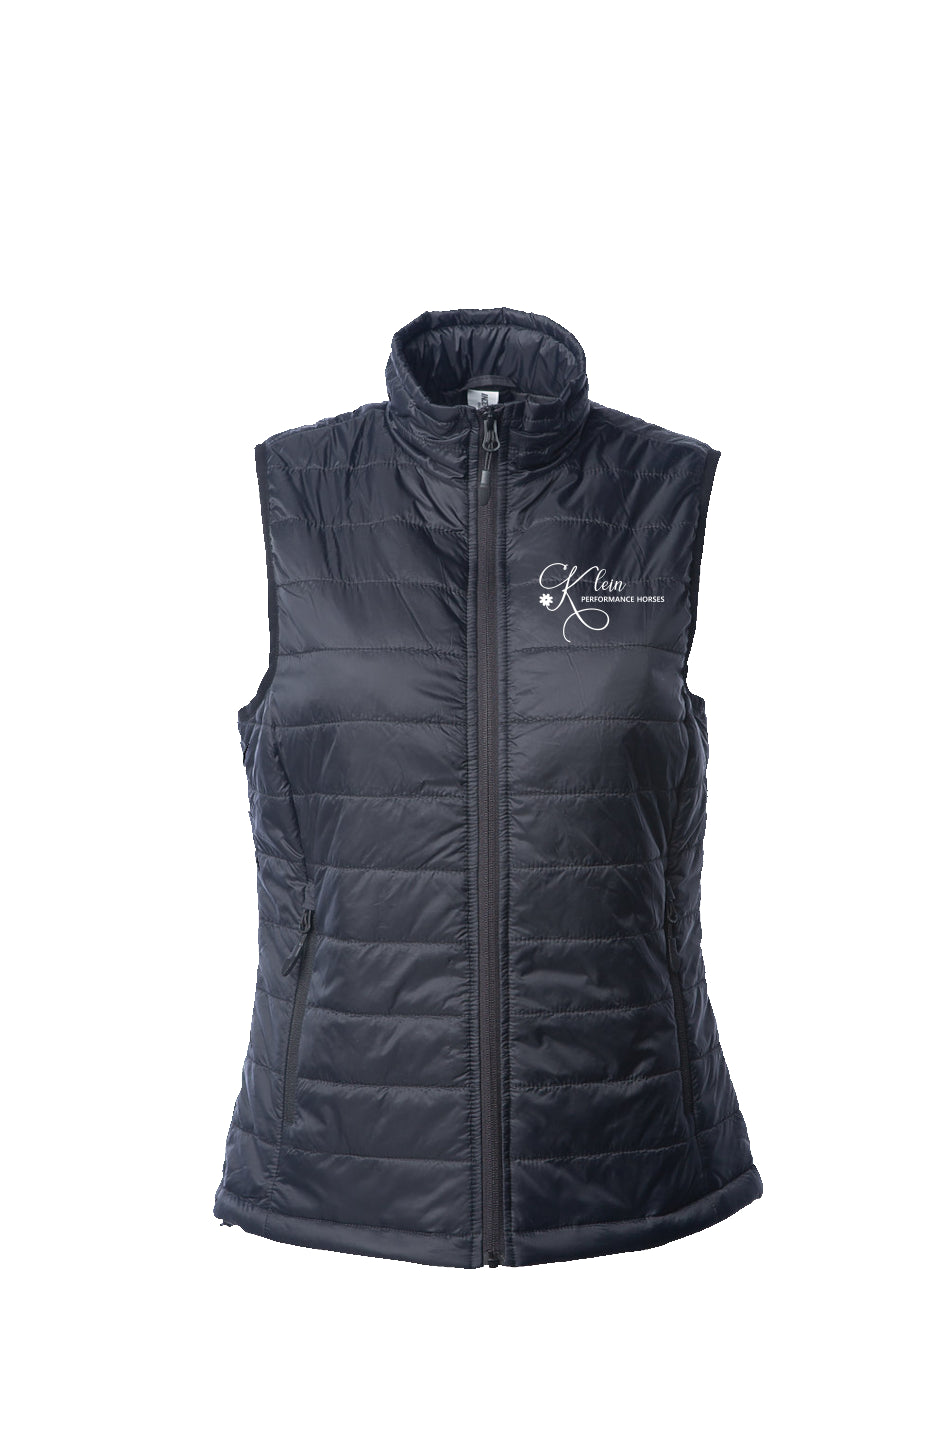 Women's Embroidered Puffer Vest - Klein Performance Horses